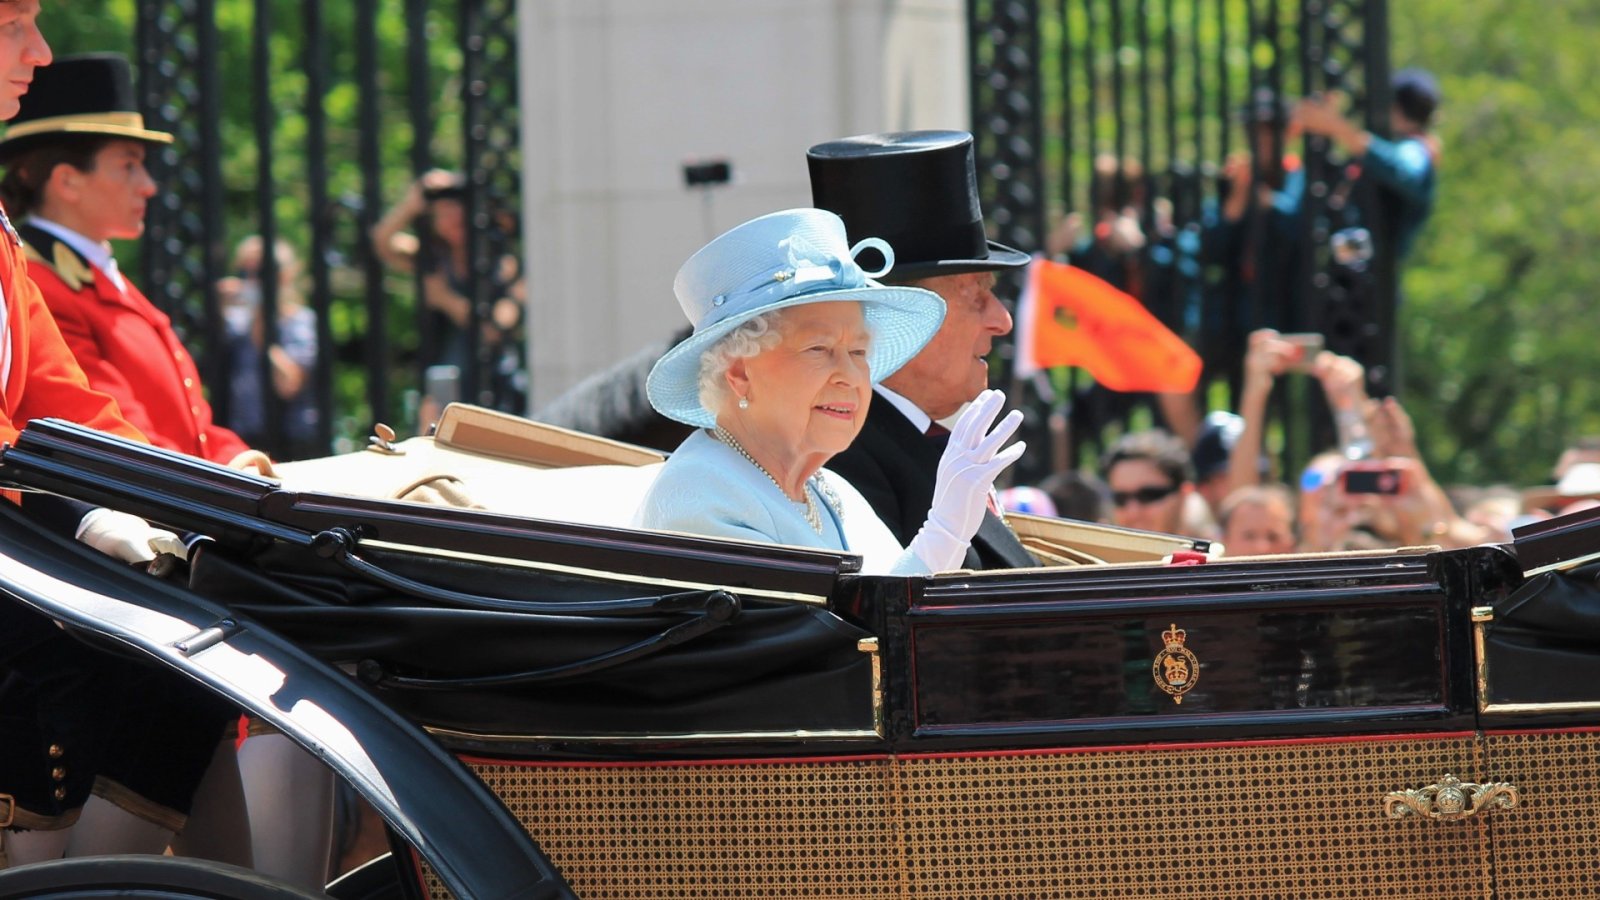 12 extraordinary facts you didn’t know about the Queen